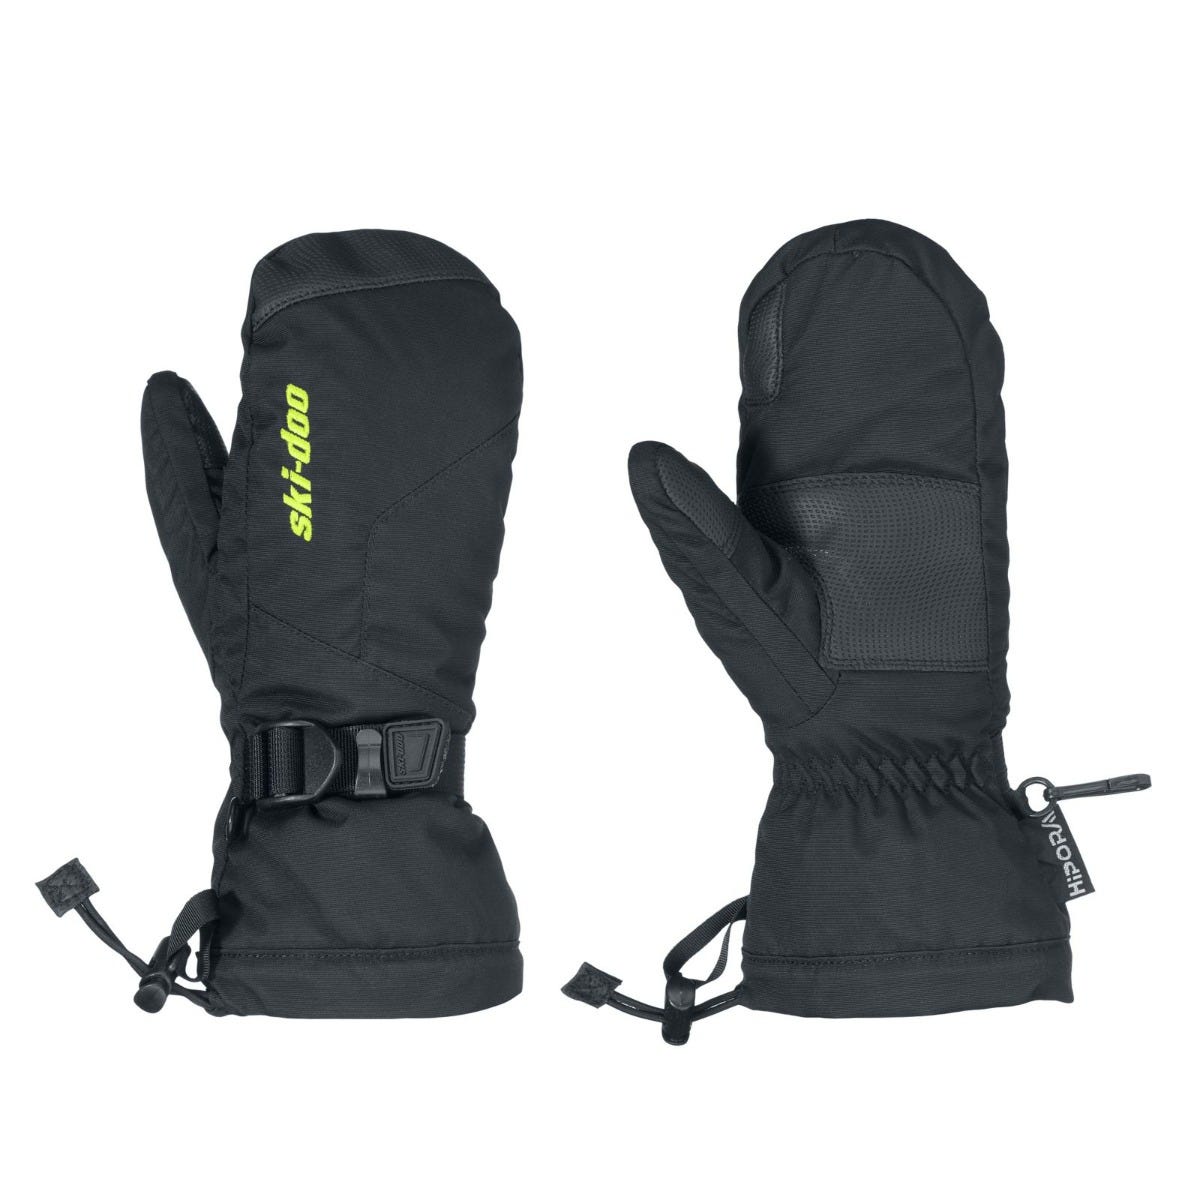 Ski-Doo Youth Particle Mitts